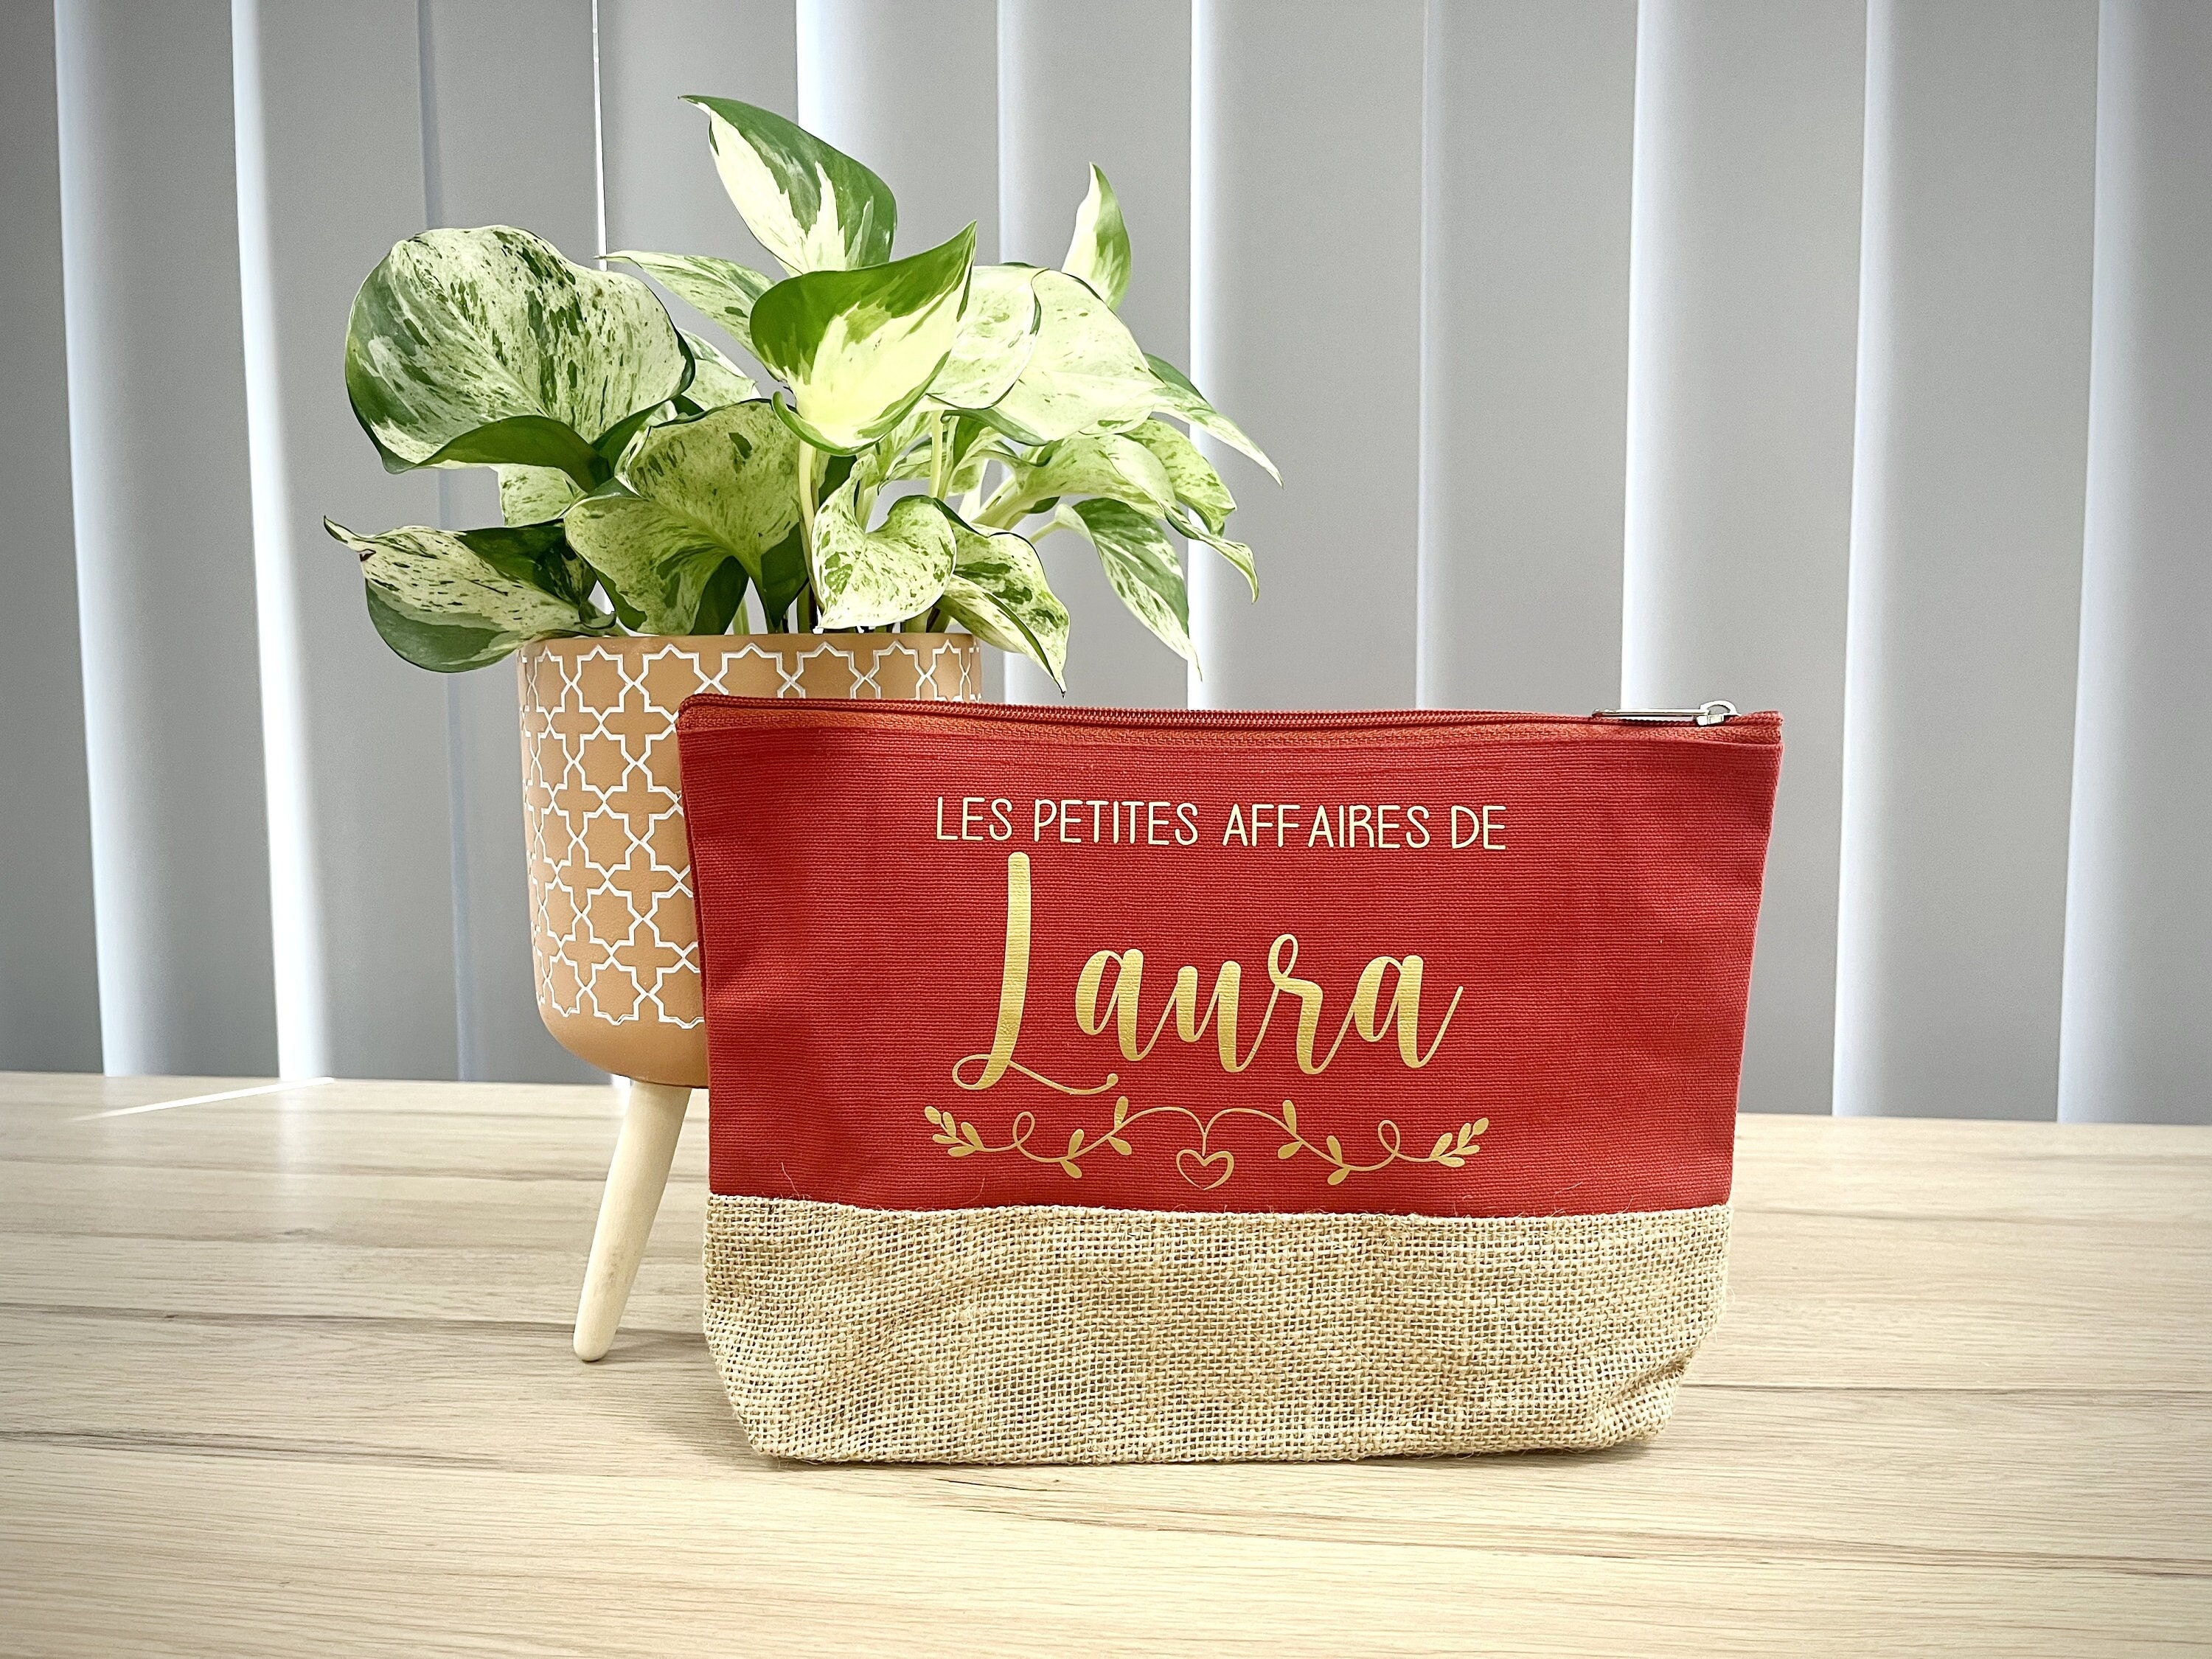 Large personalized cotton and jute pencil case, Gift for Mom, Teacher, Nanny... to personalize.